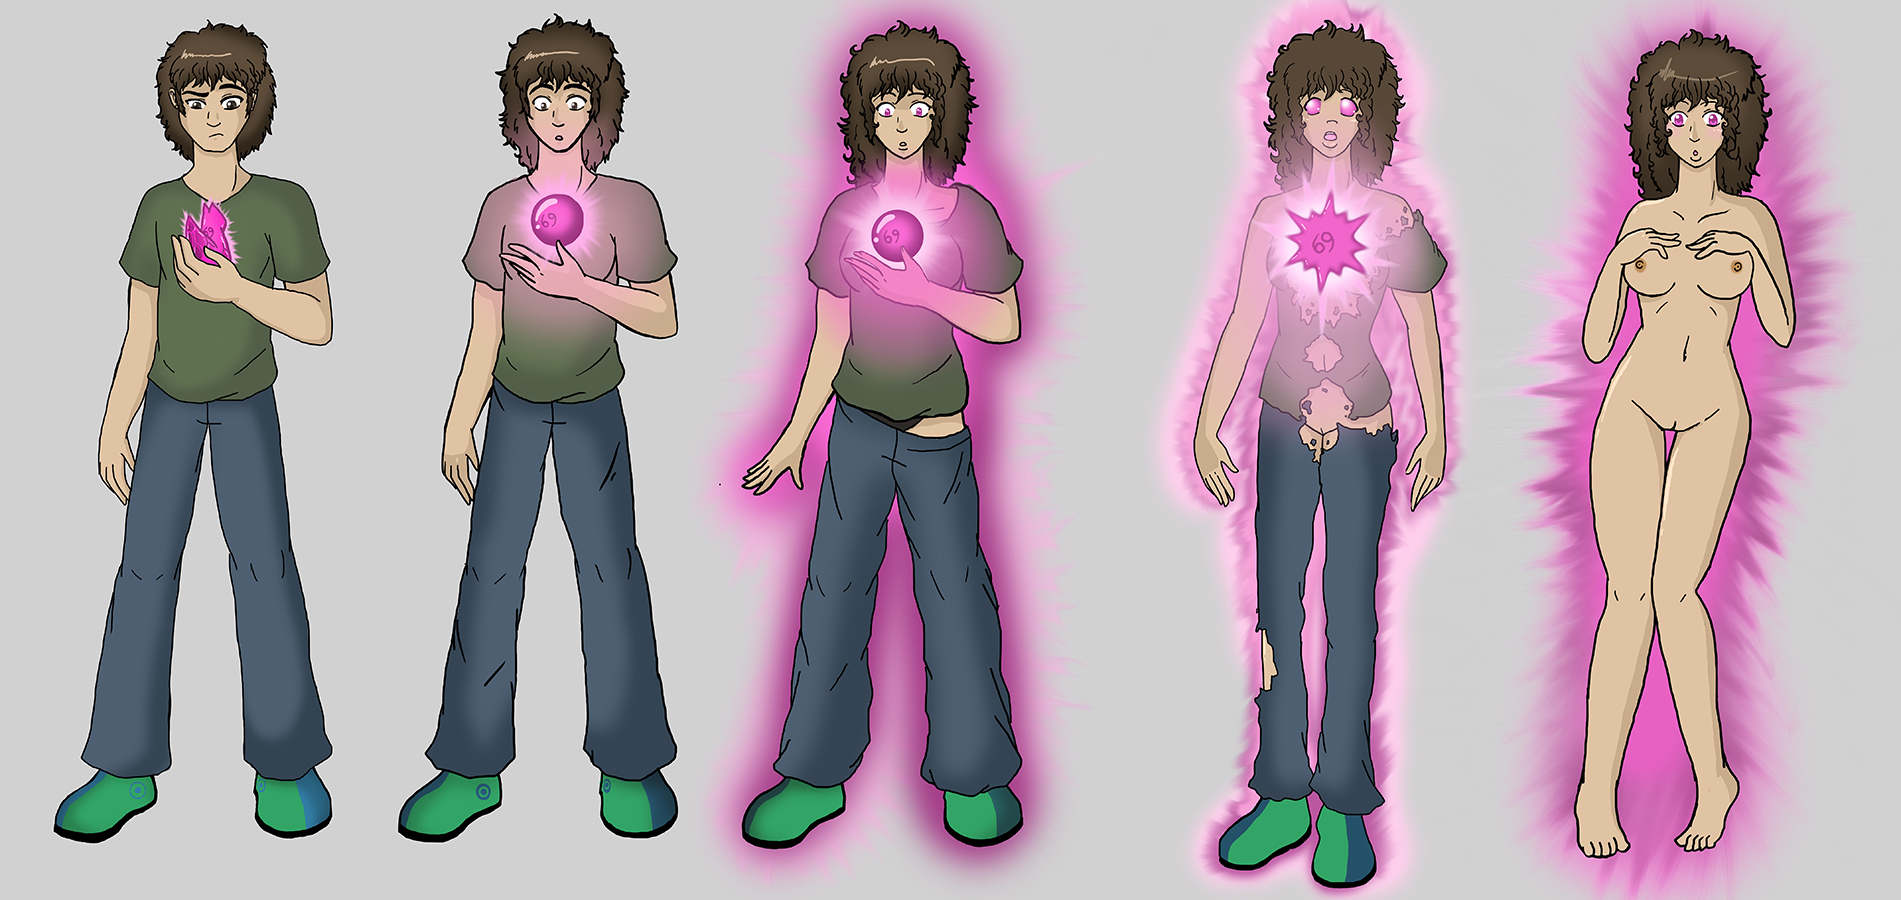 Male to female transformation art